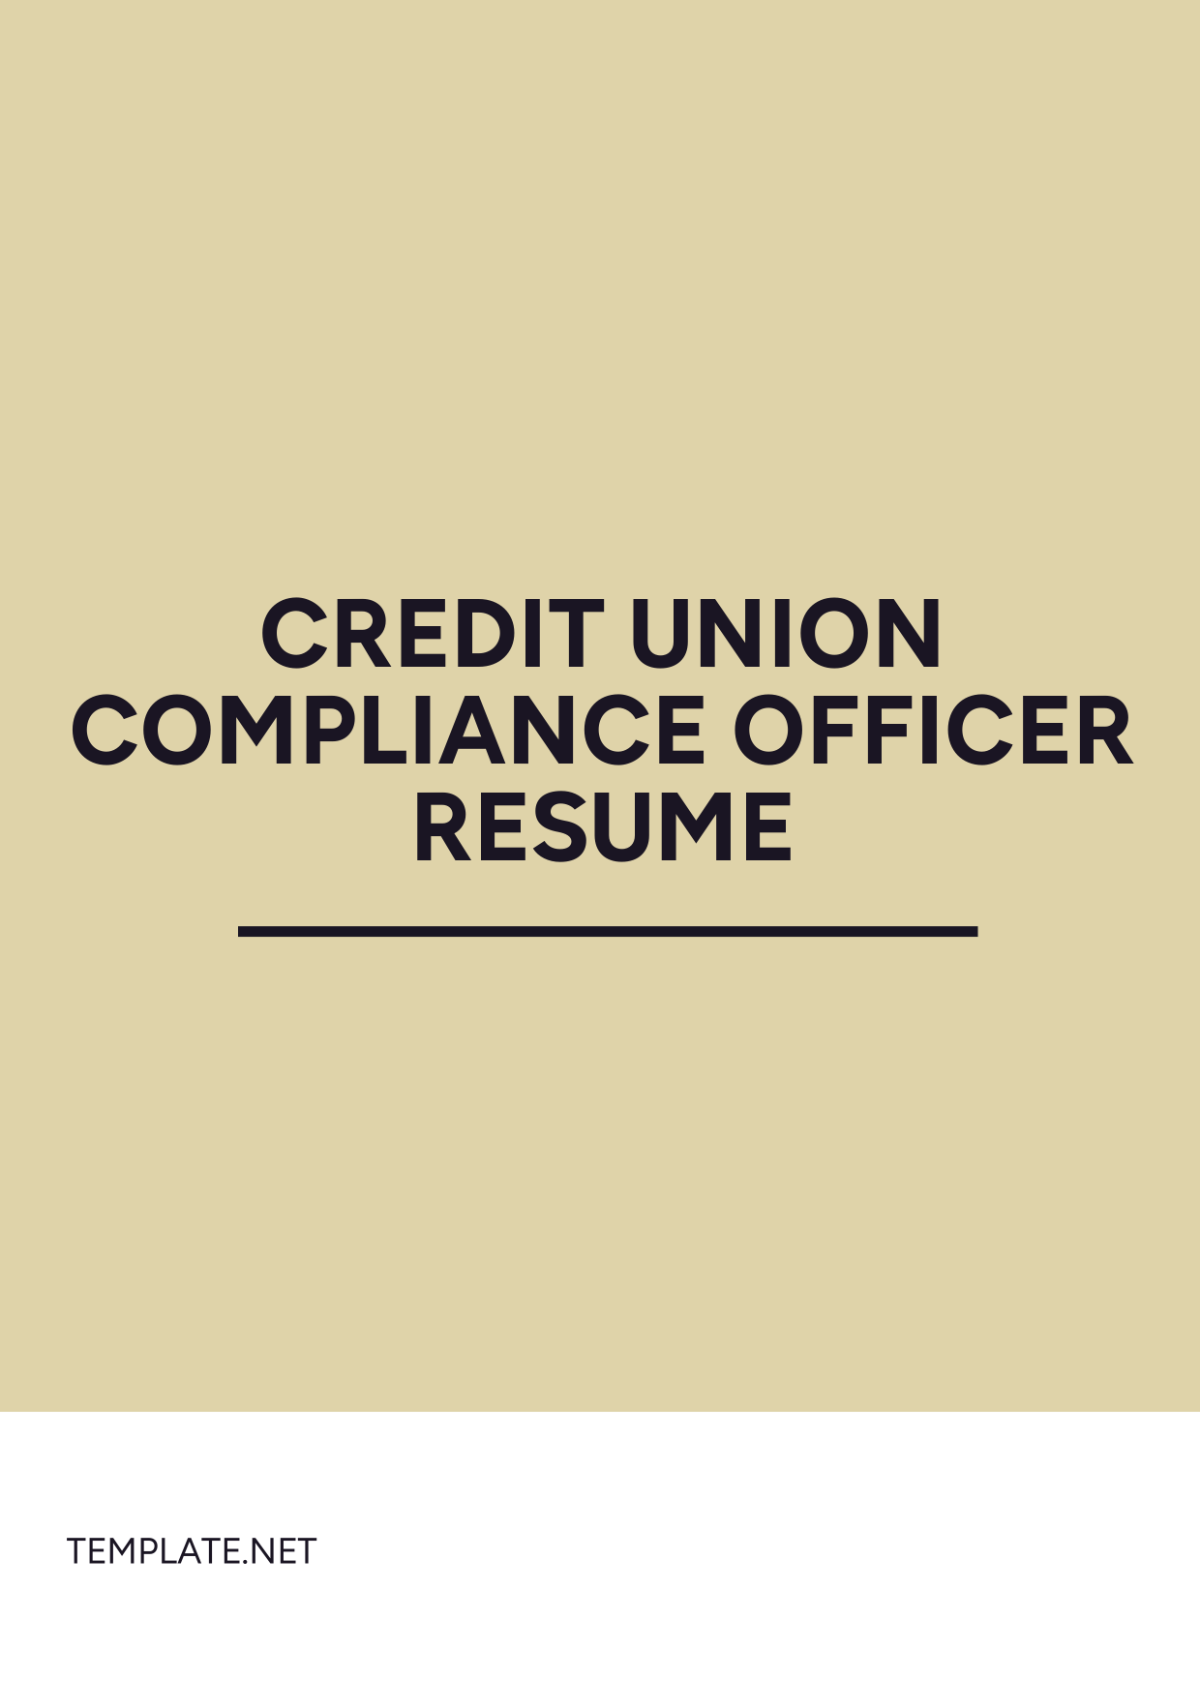 Credit Union Compliance Officer Resume Template